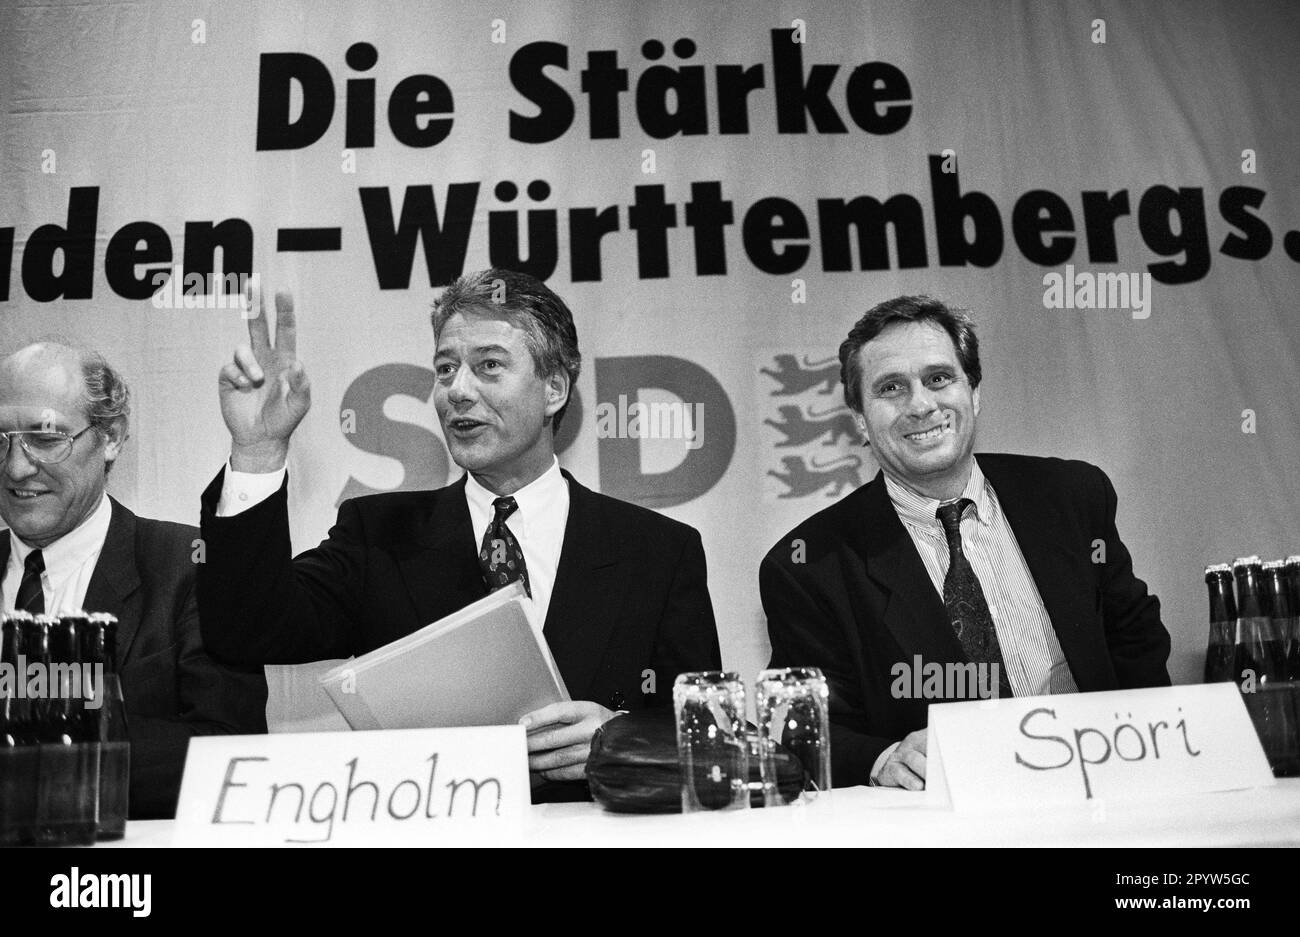 Germany, Lahr, 10.03.1992. Archive: 32-39-14 State parliament election campaign in Baden-Wuerttemberg Photo: SPD chairman Bjoern Engholm and SPD top candidate Dieter Spoeri [automated translation] Stock Photo